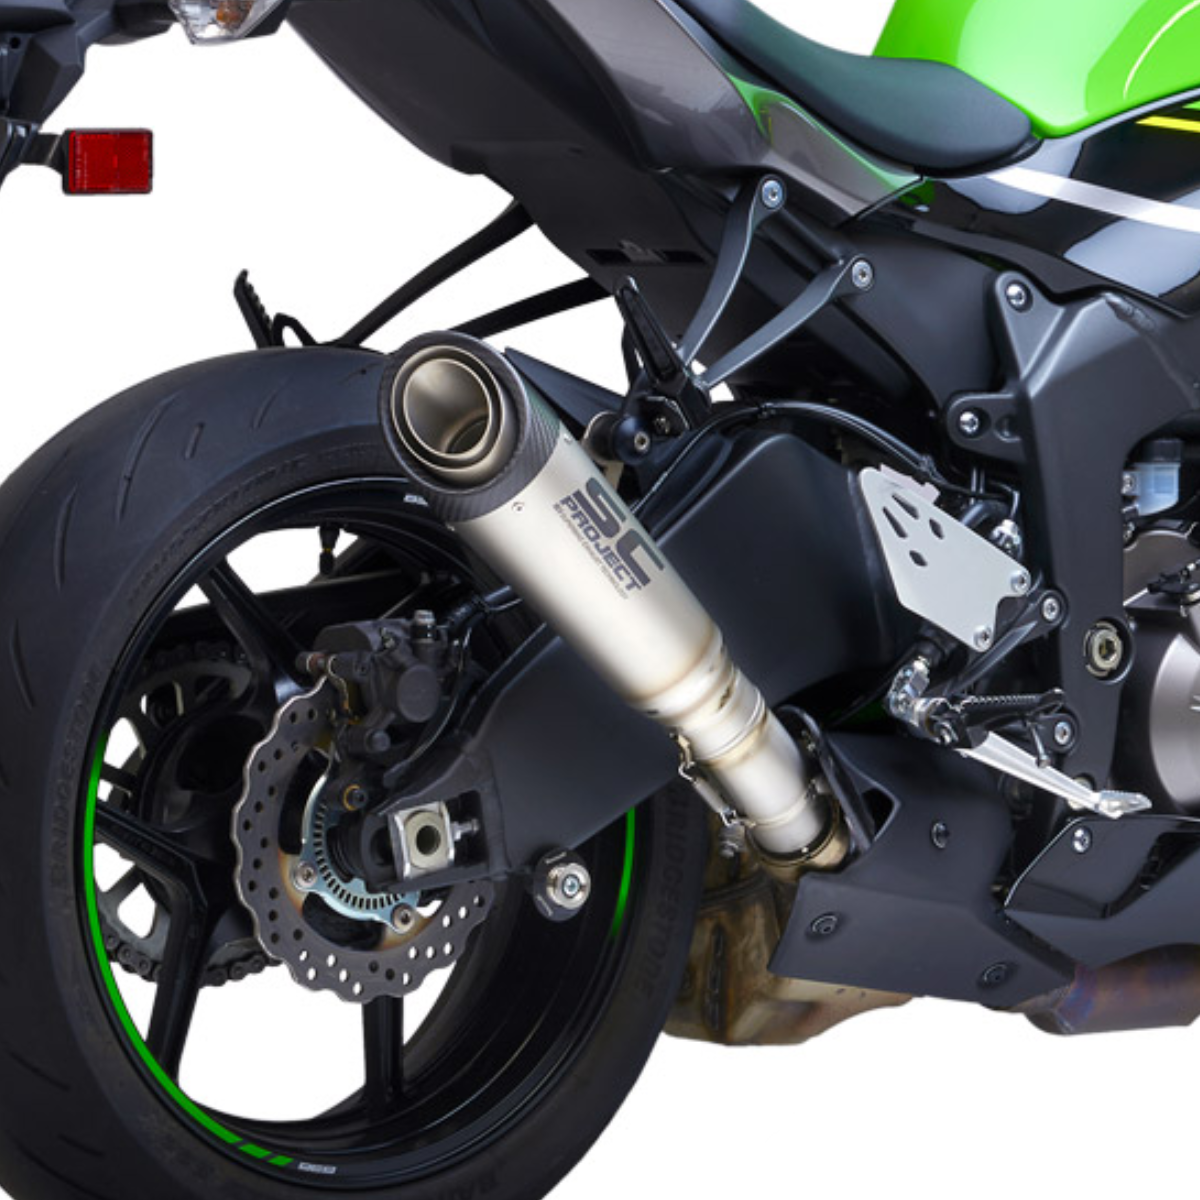 SC Project Releases SC1-S Full-System For 2021 Yamaha MT-07